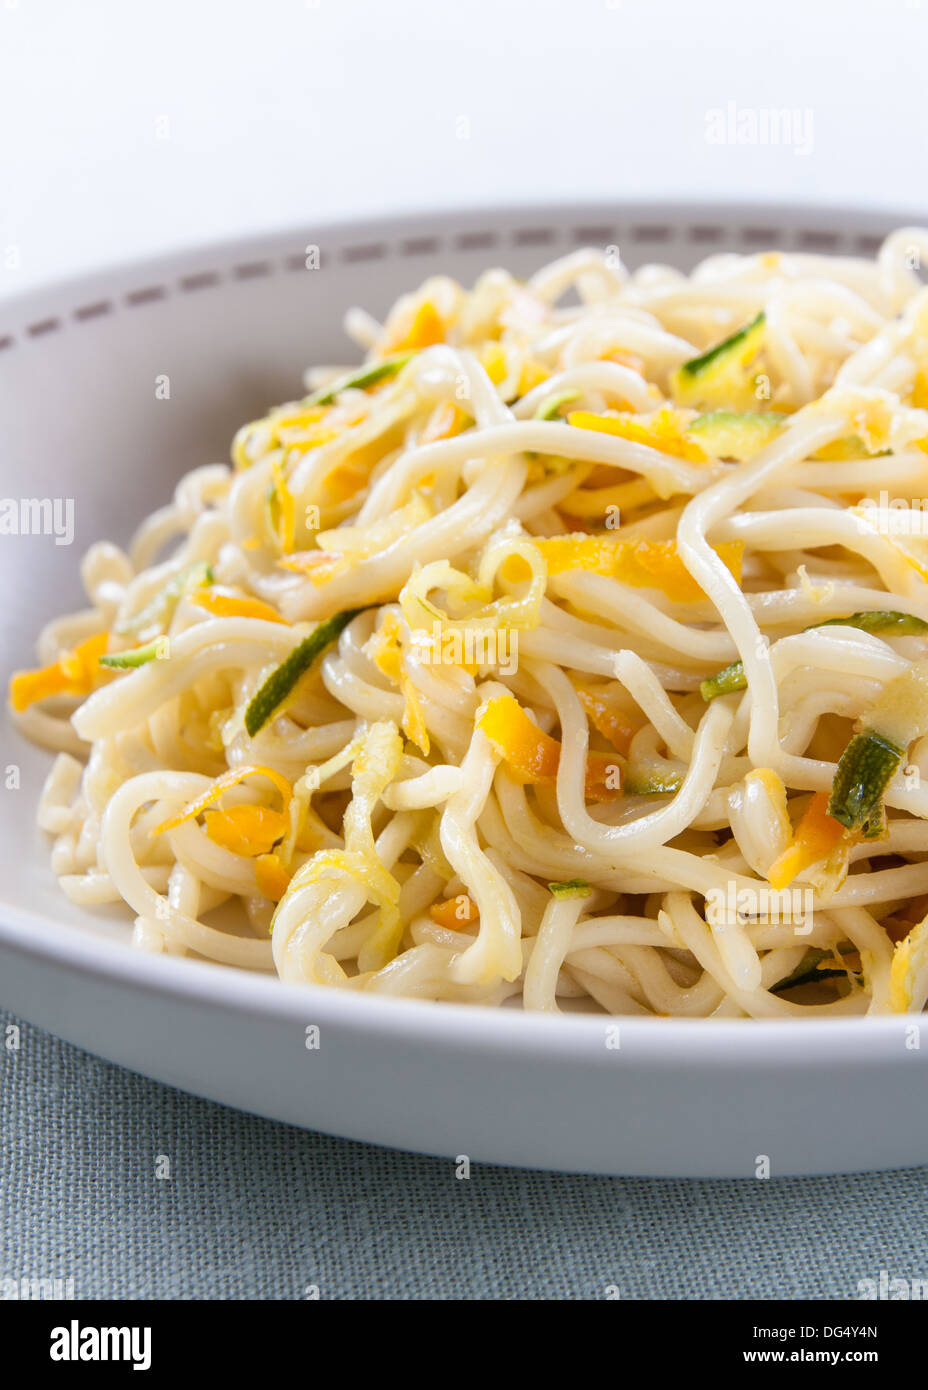 Chinese noodle dish sauteed with vegetables Stock Photo